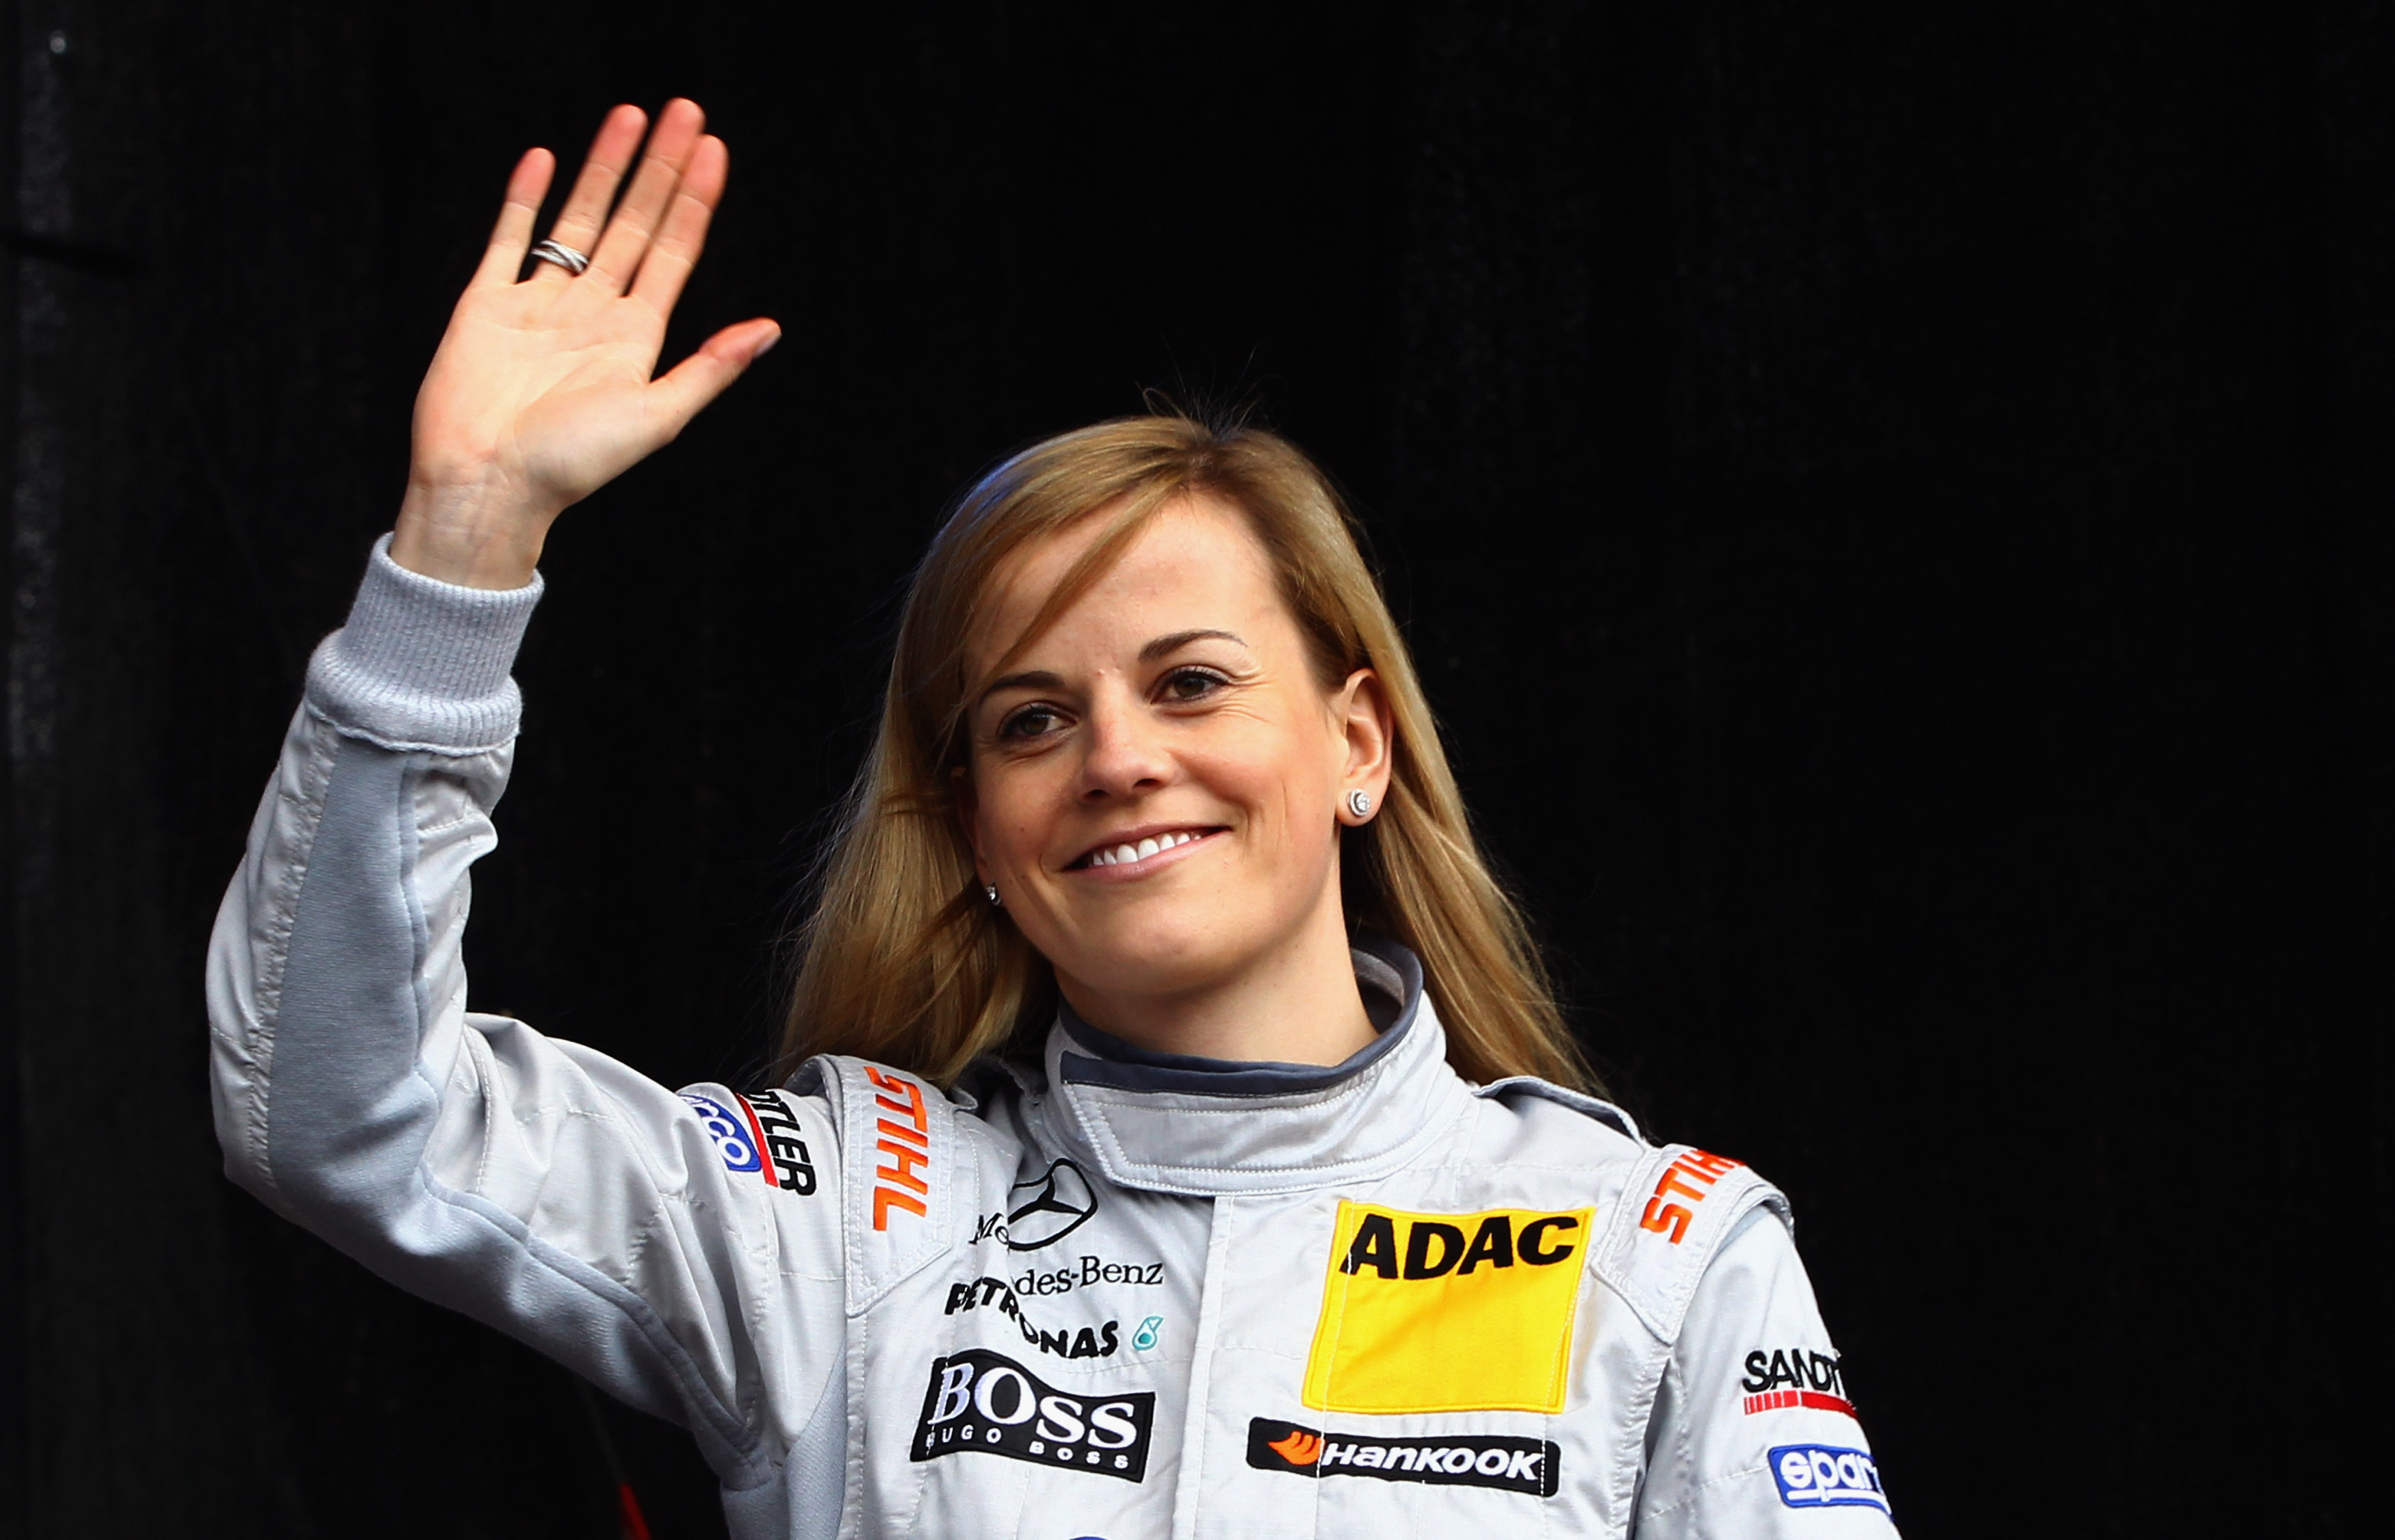 British Mercedes driver Susie Wolff waves during the DTM touring car presentation on April 22, 2012 in Wiesbaden, Germany. (Alex Grimm—Bongarts/Getty Images)